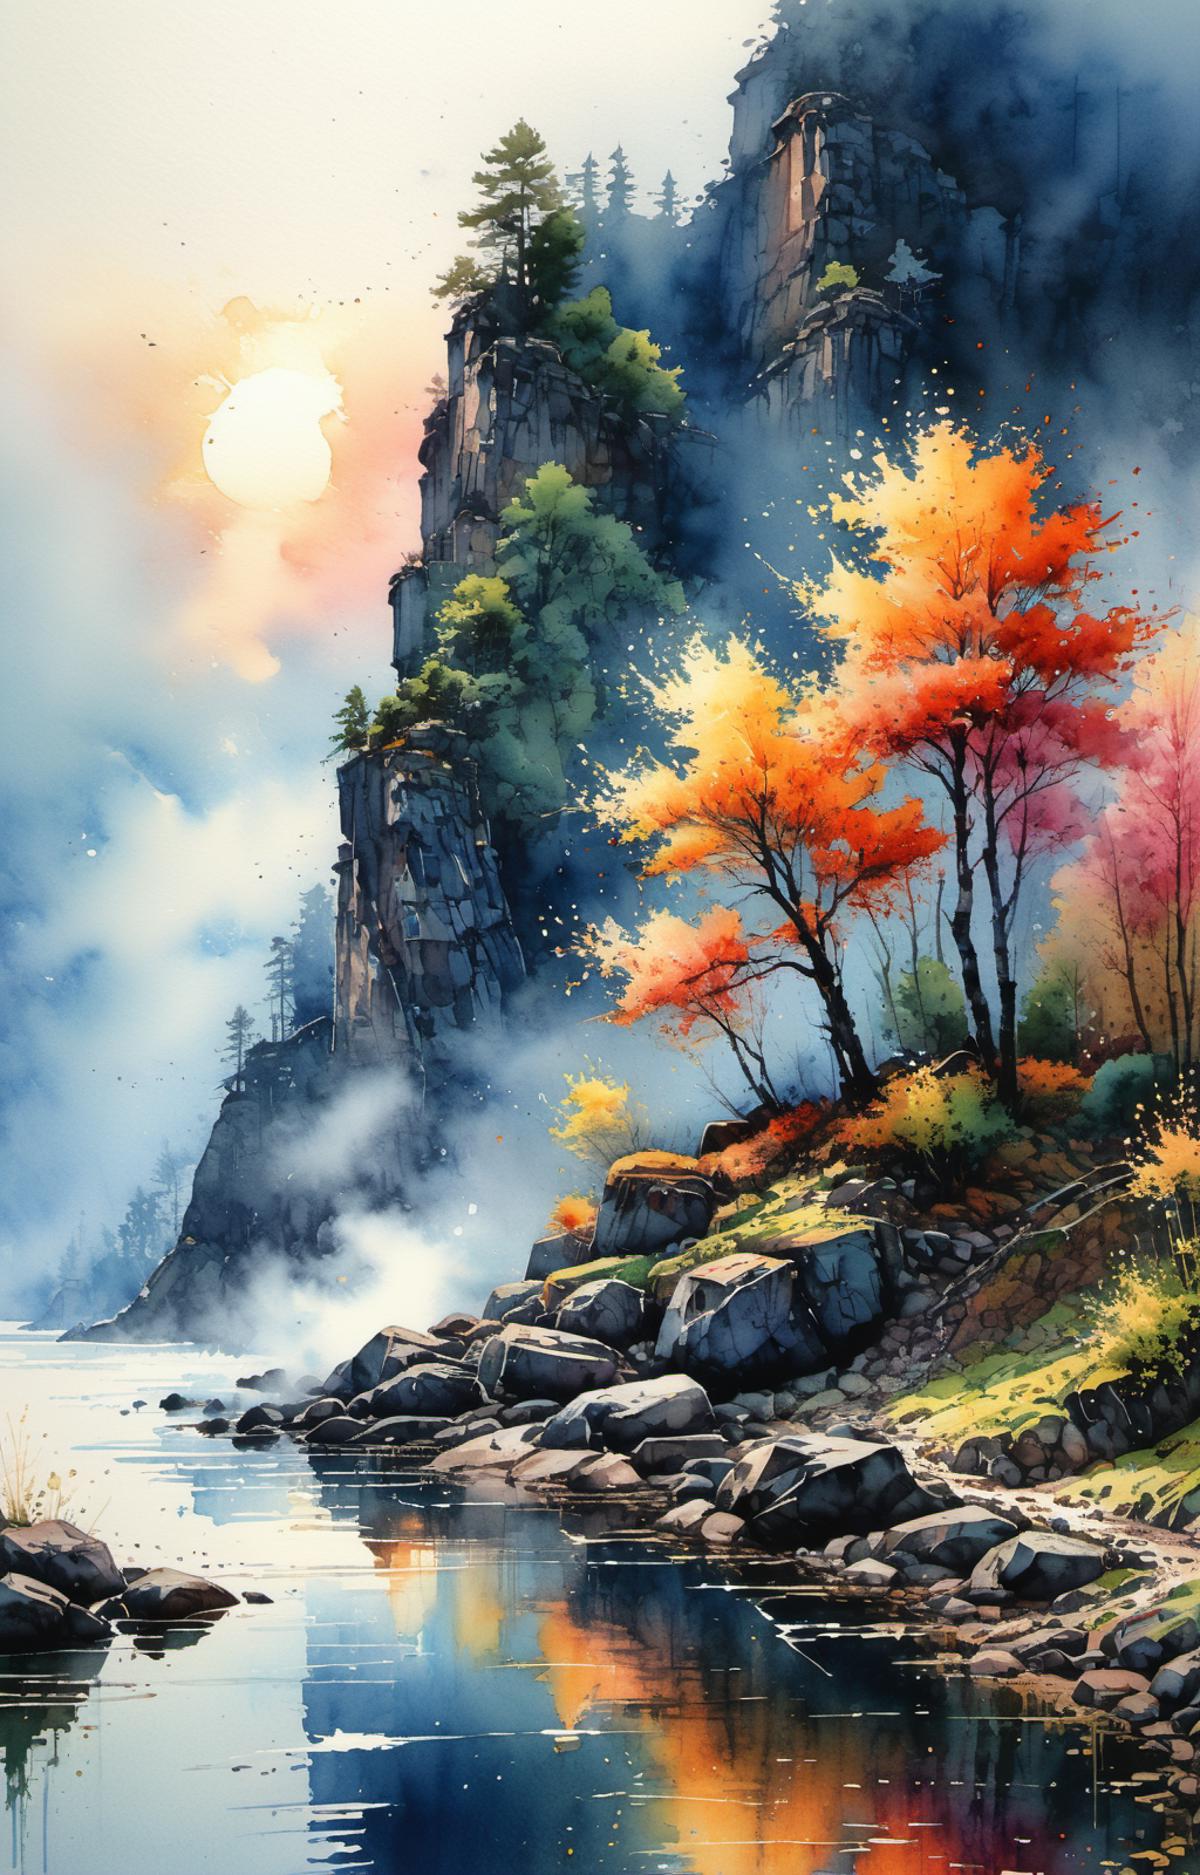 A serene mountain river scene with a waterfall.